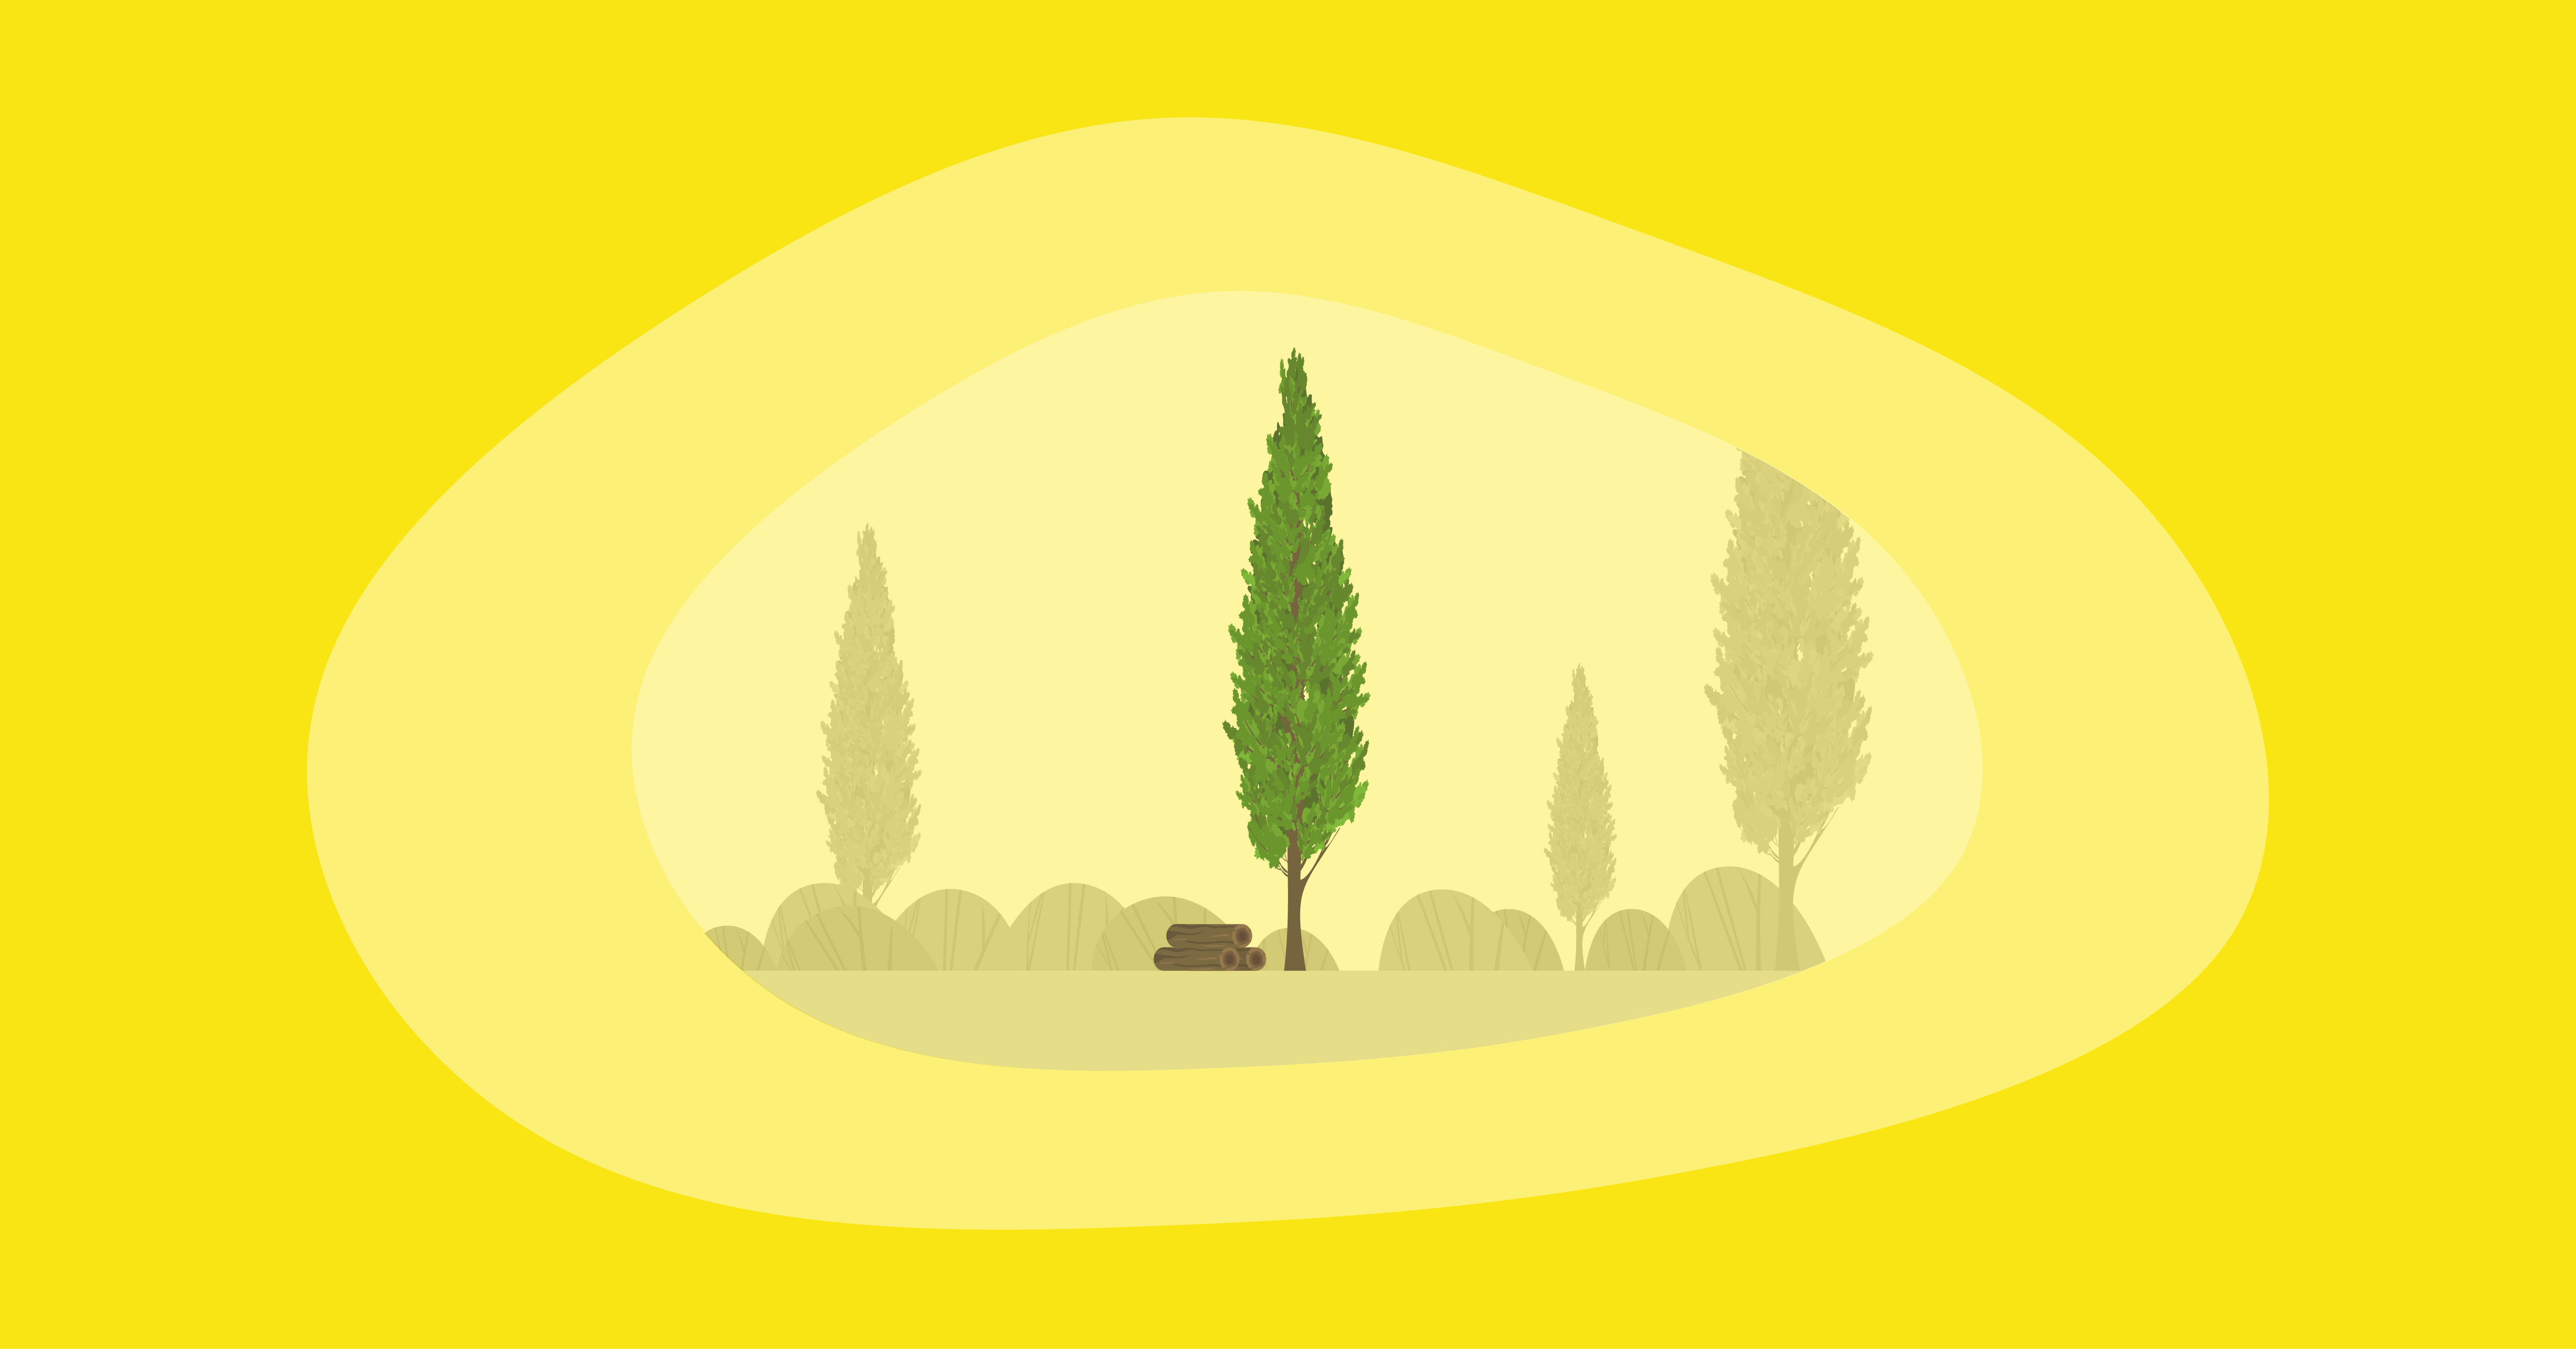 Illustration of a cypress tree and wood